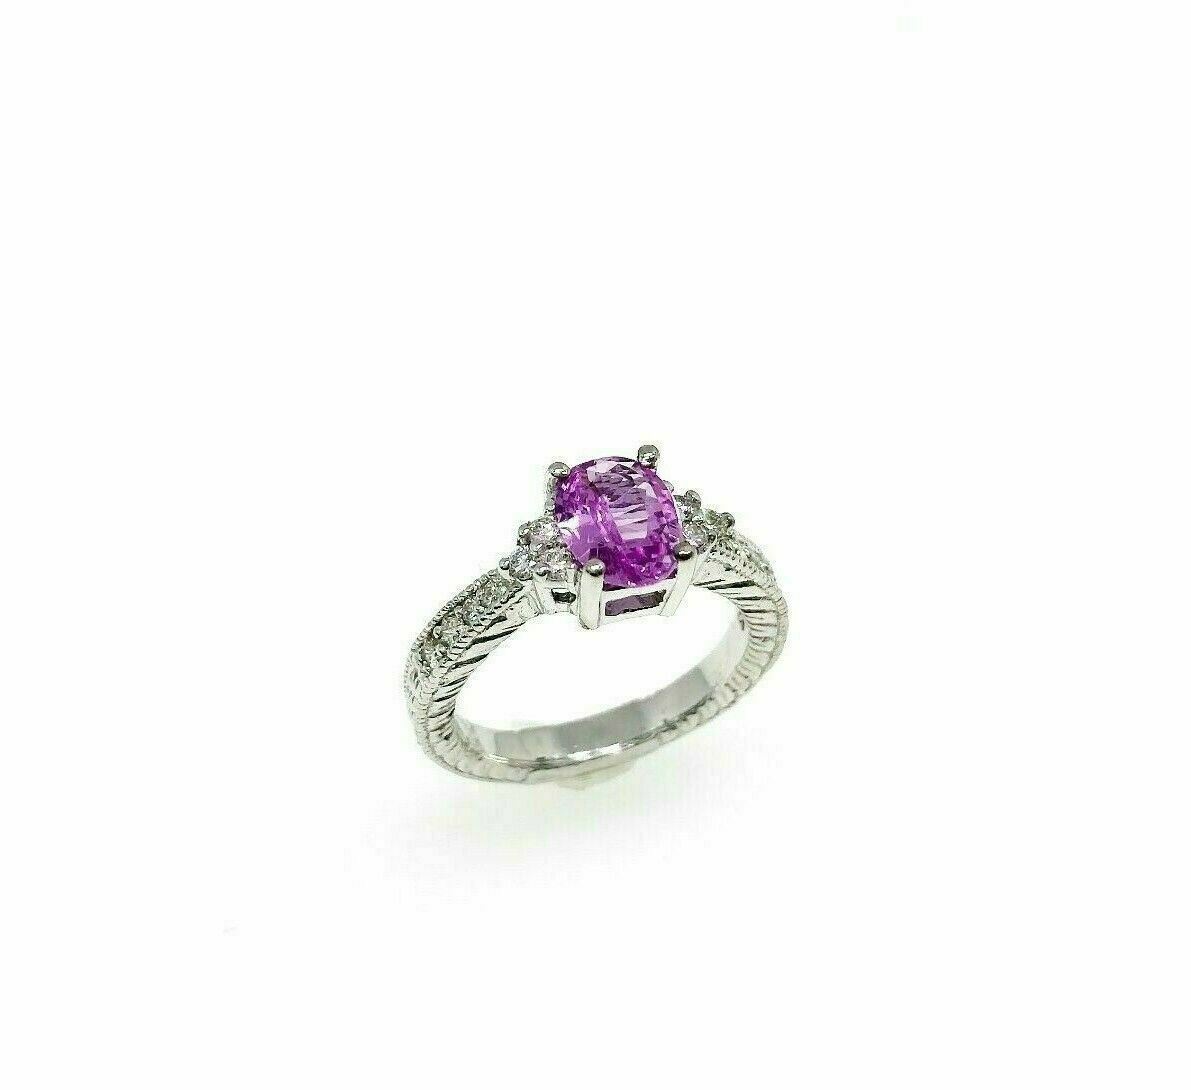 1.69 Carats t.w. Diamond and Pink Sapphire Wedding/ Anniversary Ring 18K Gold